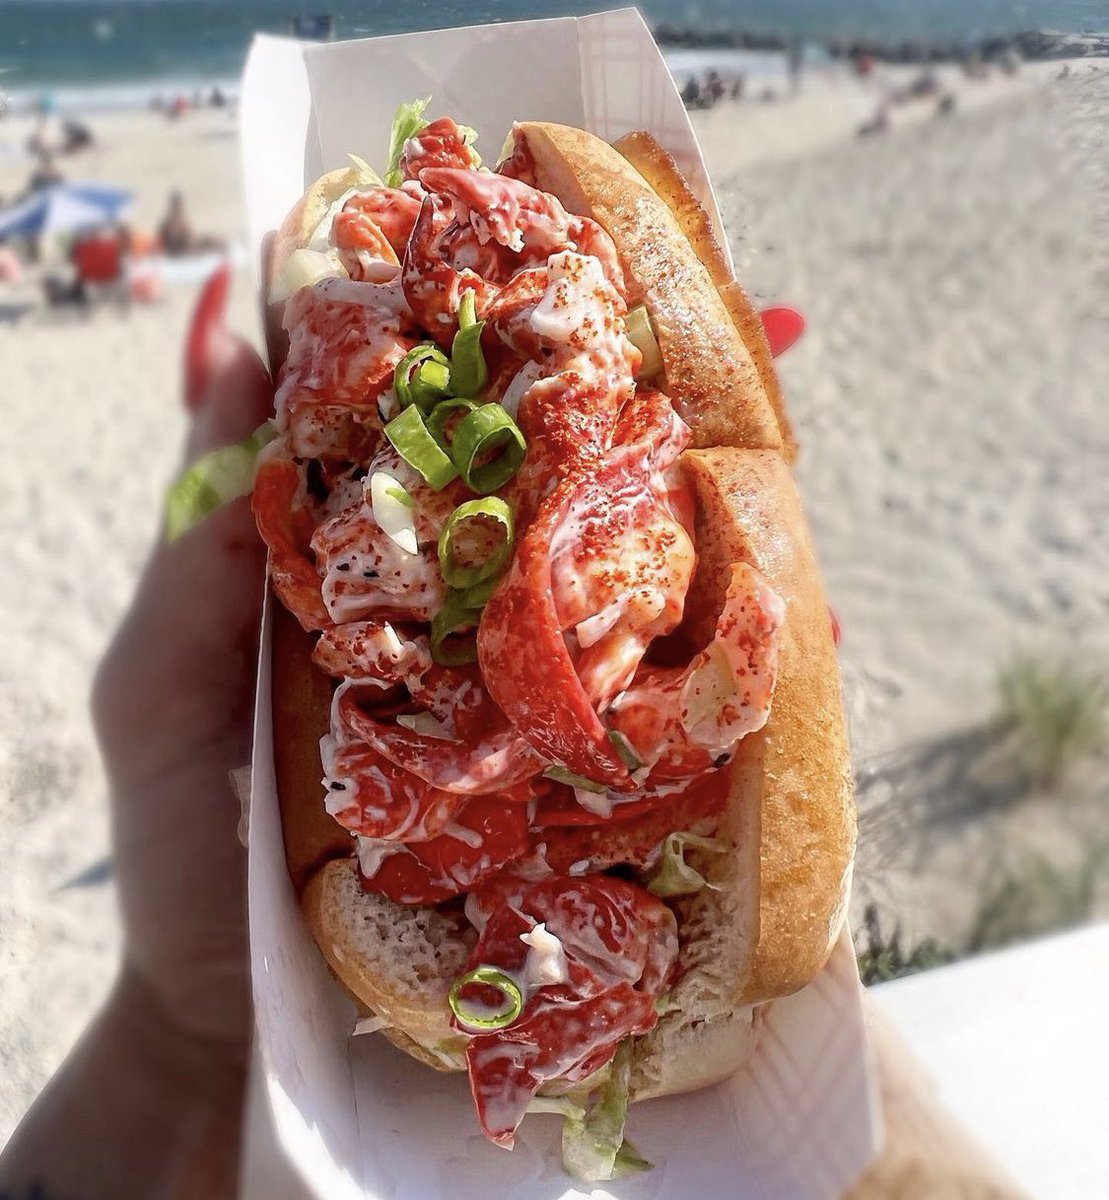 Check out this tasty lobster roll from @redhooklobster ⚓️☀️🌊🦞photo by @eeeeatsnyc 

#lobsterroll #seafoodlover #beacheats #eaterny #summerfood